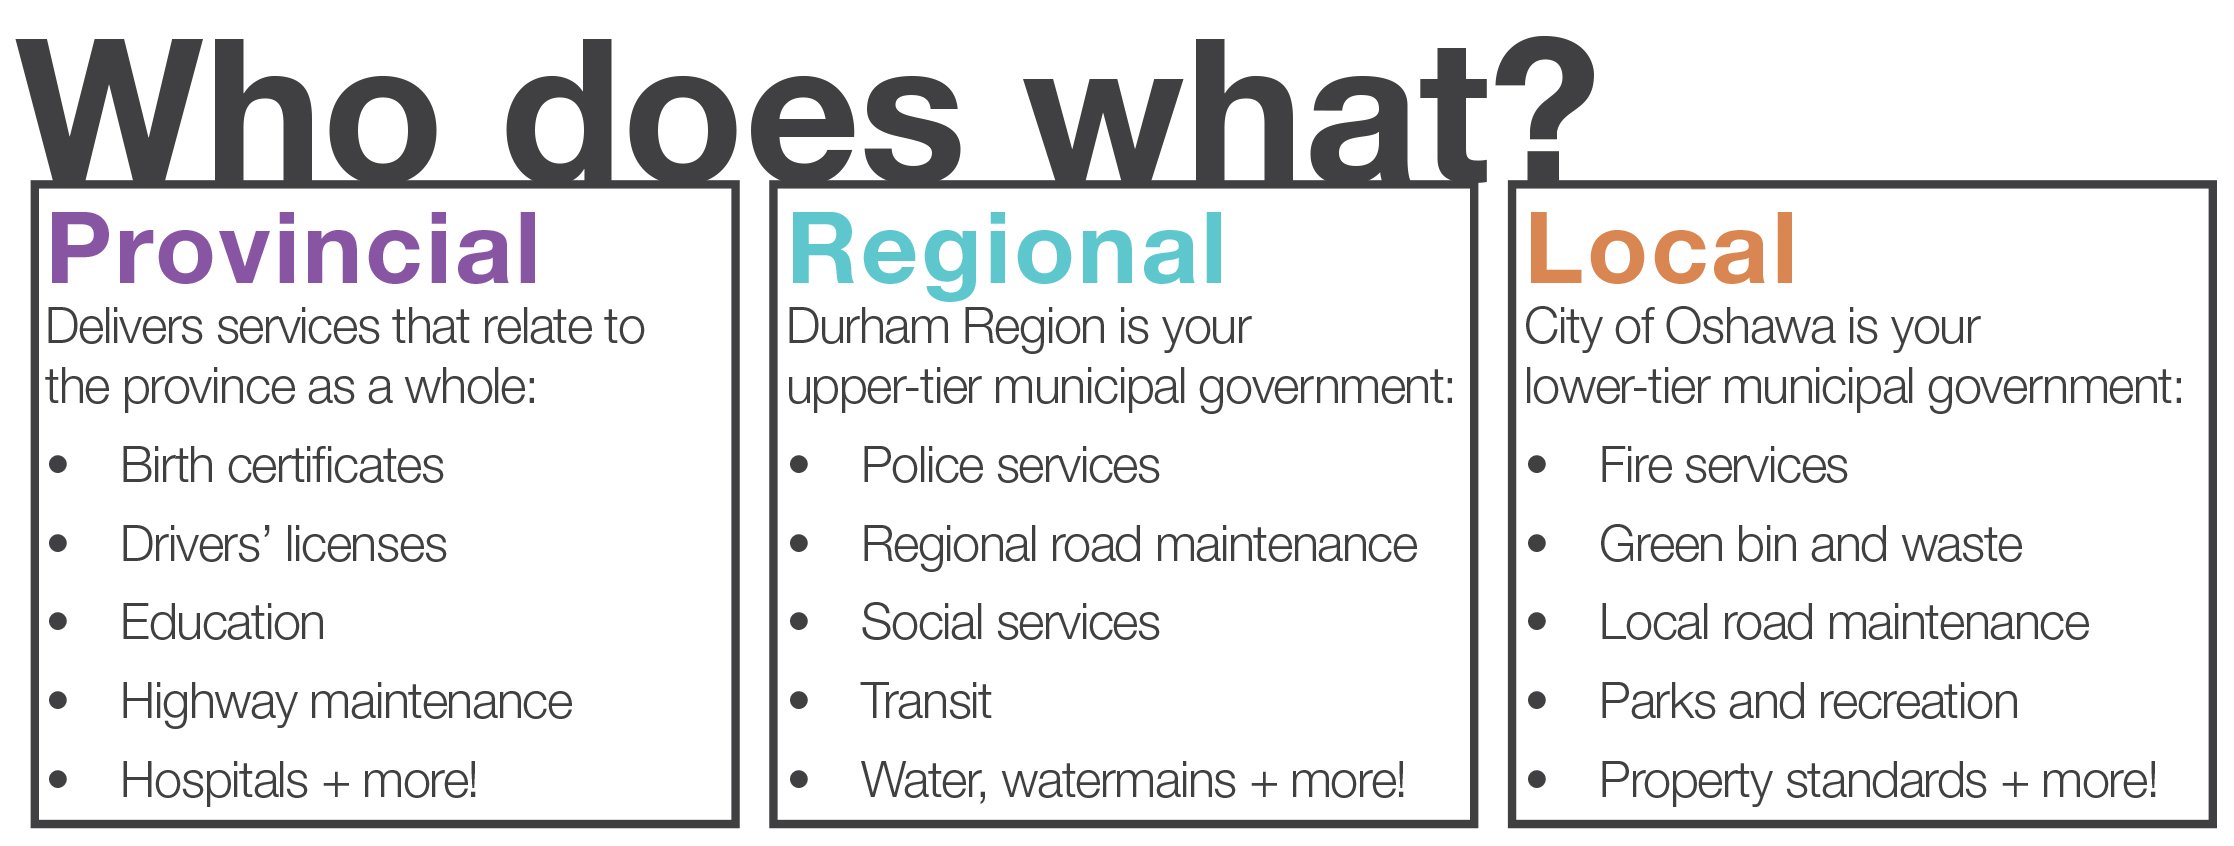 Reads "Who does what?" and lists services specific to the Provincial, Regional and Local levels of government. A full list is availale on our Governement Services webpage (link on this page).